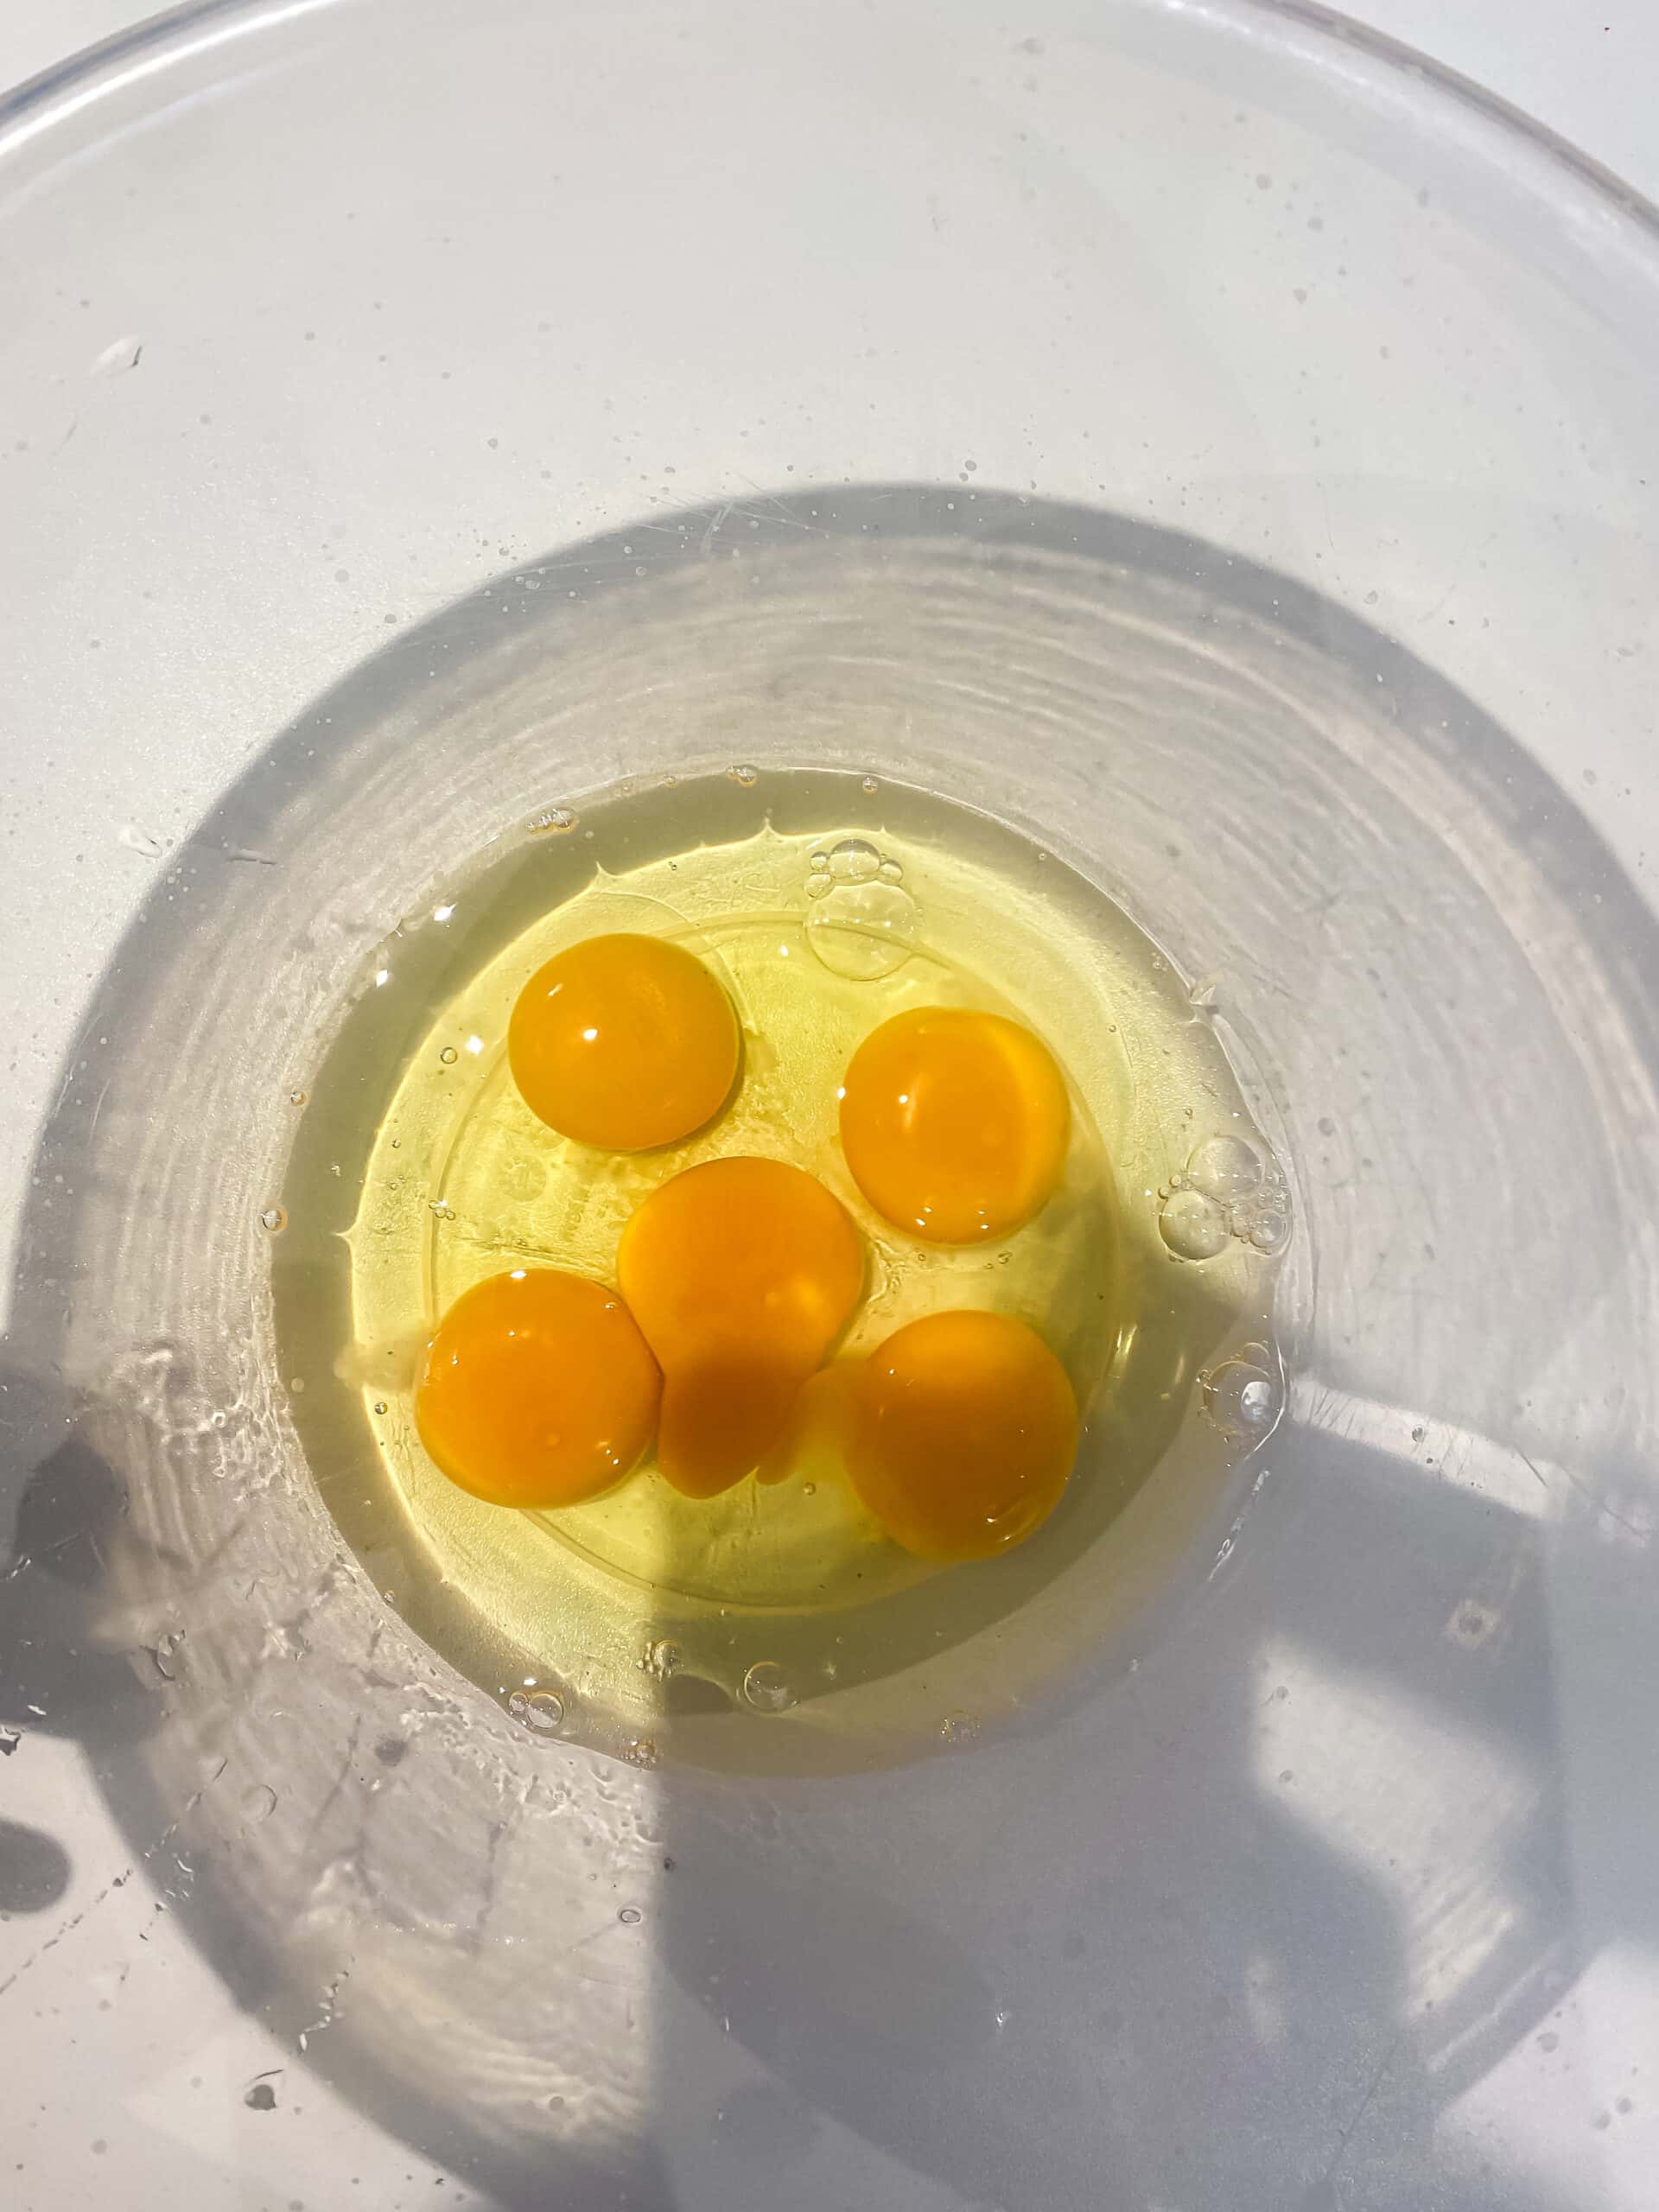 Whisk the eggs, sugar and milk